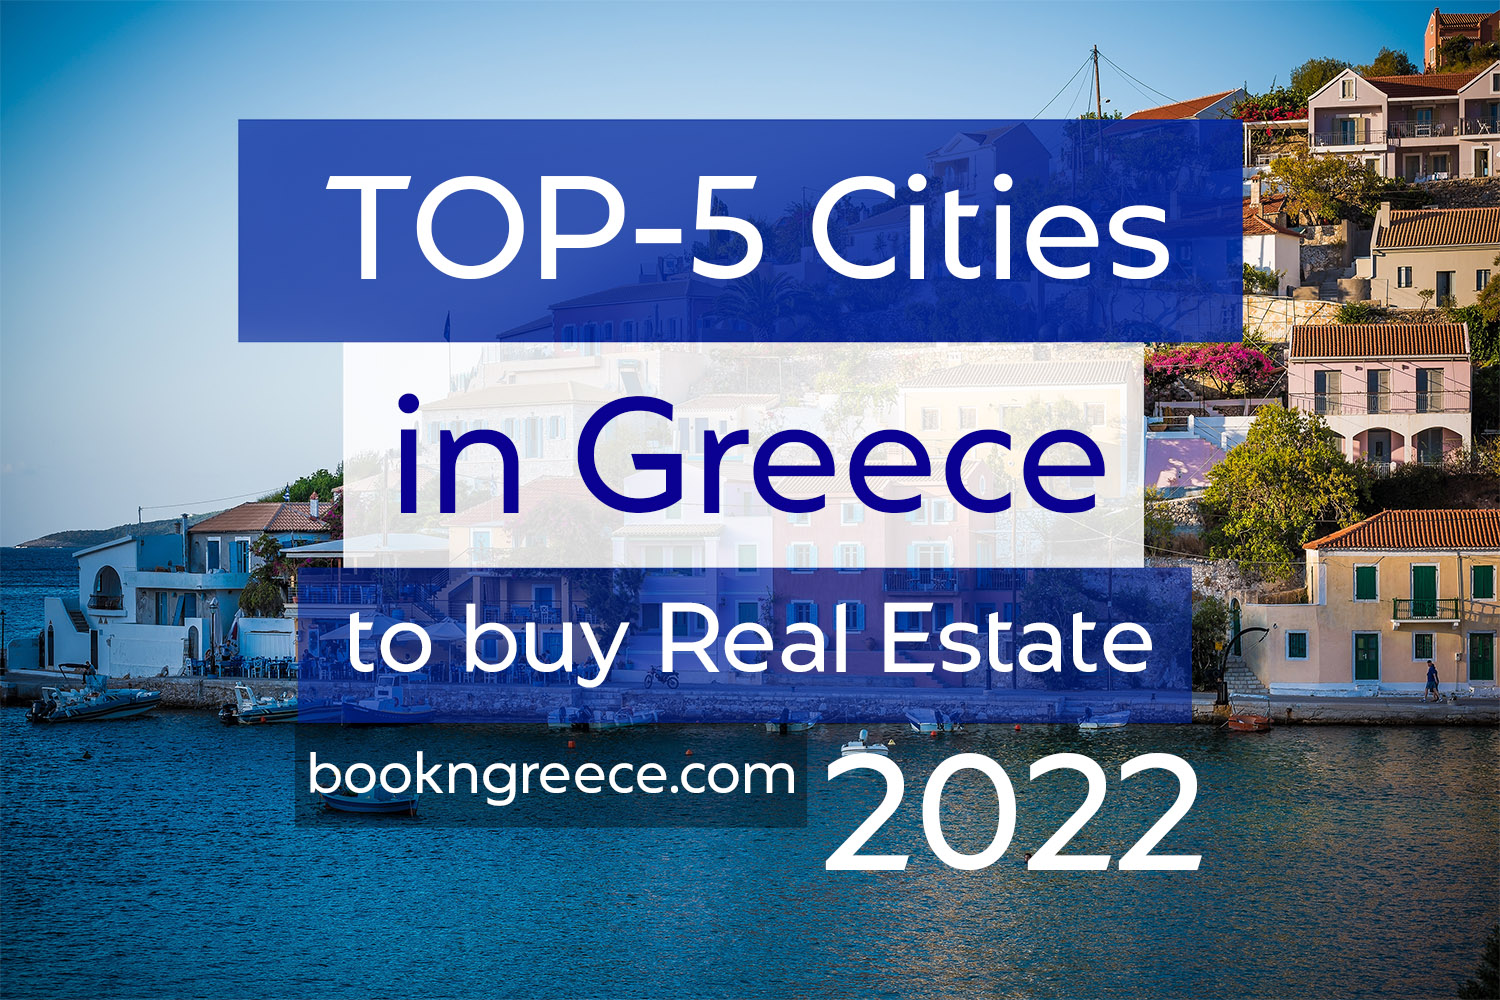 Top 5 cities in greece to buy real estate 2020.